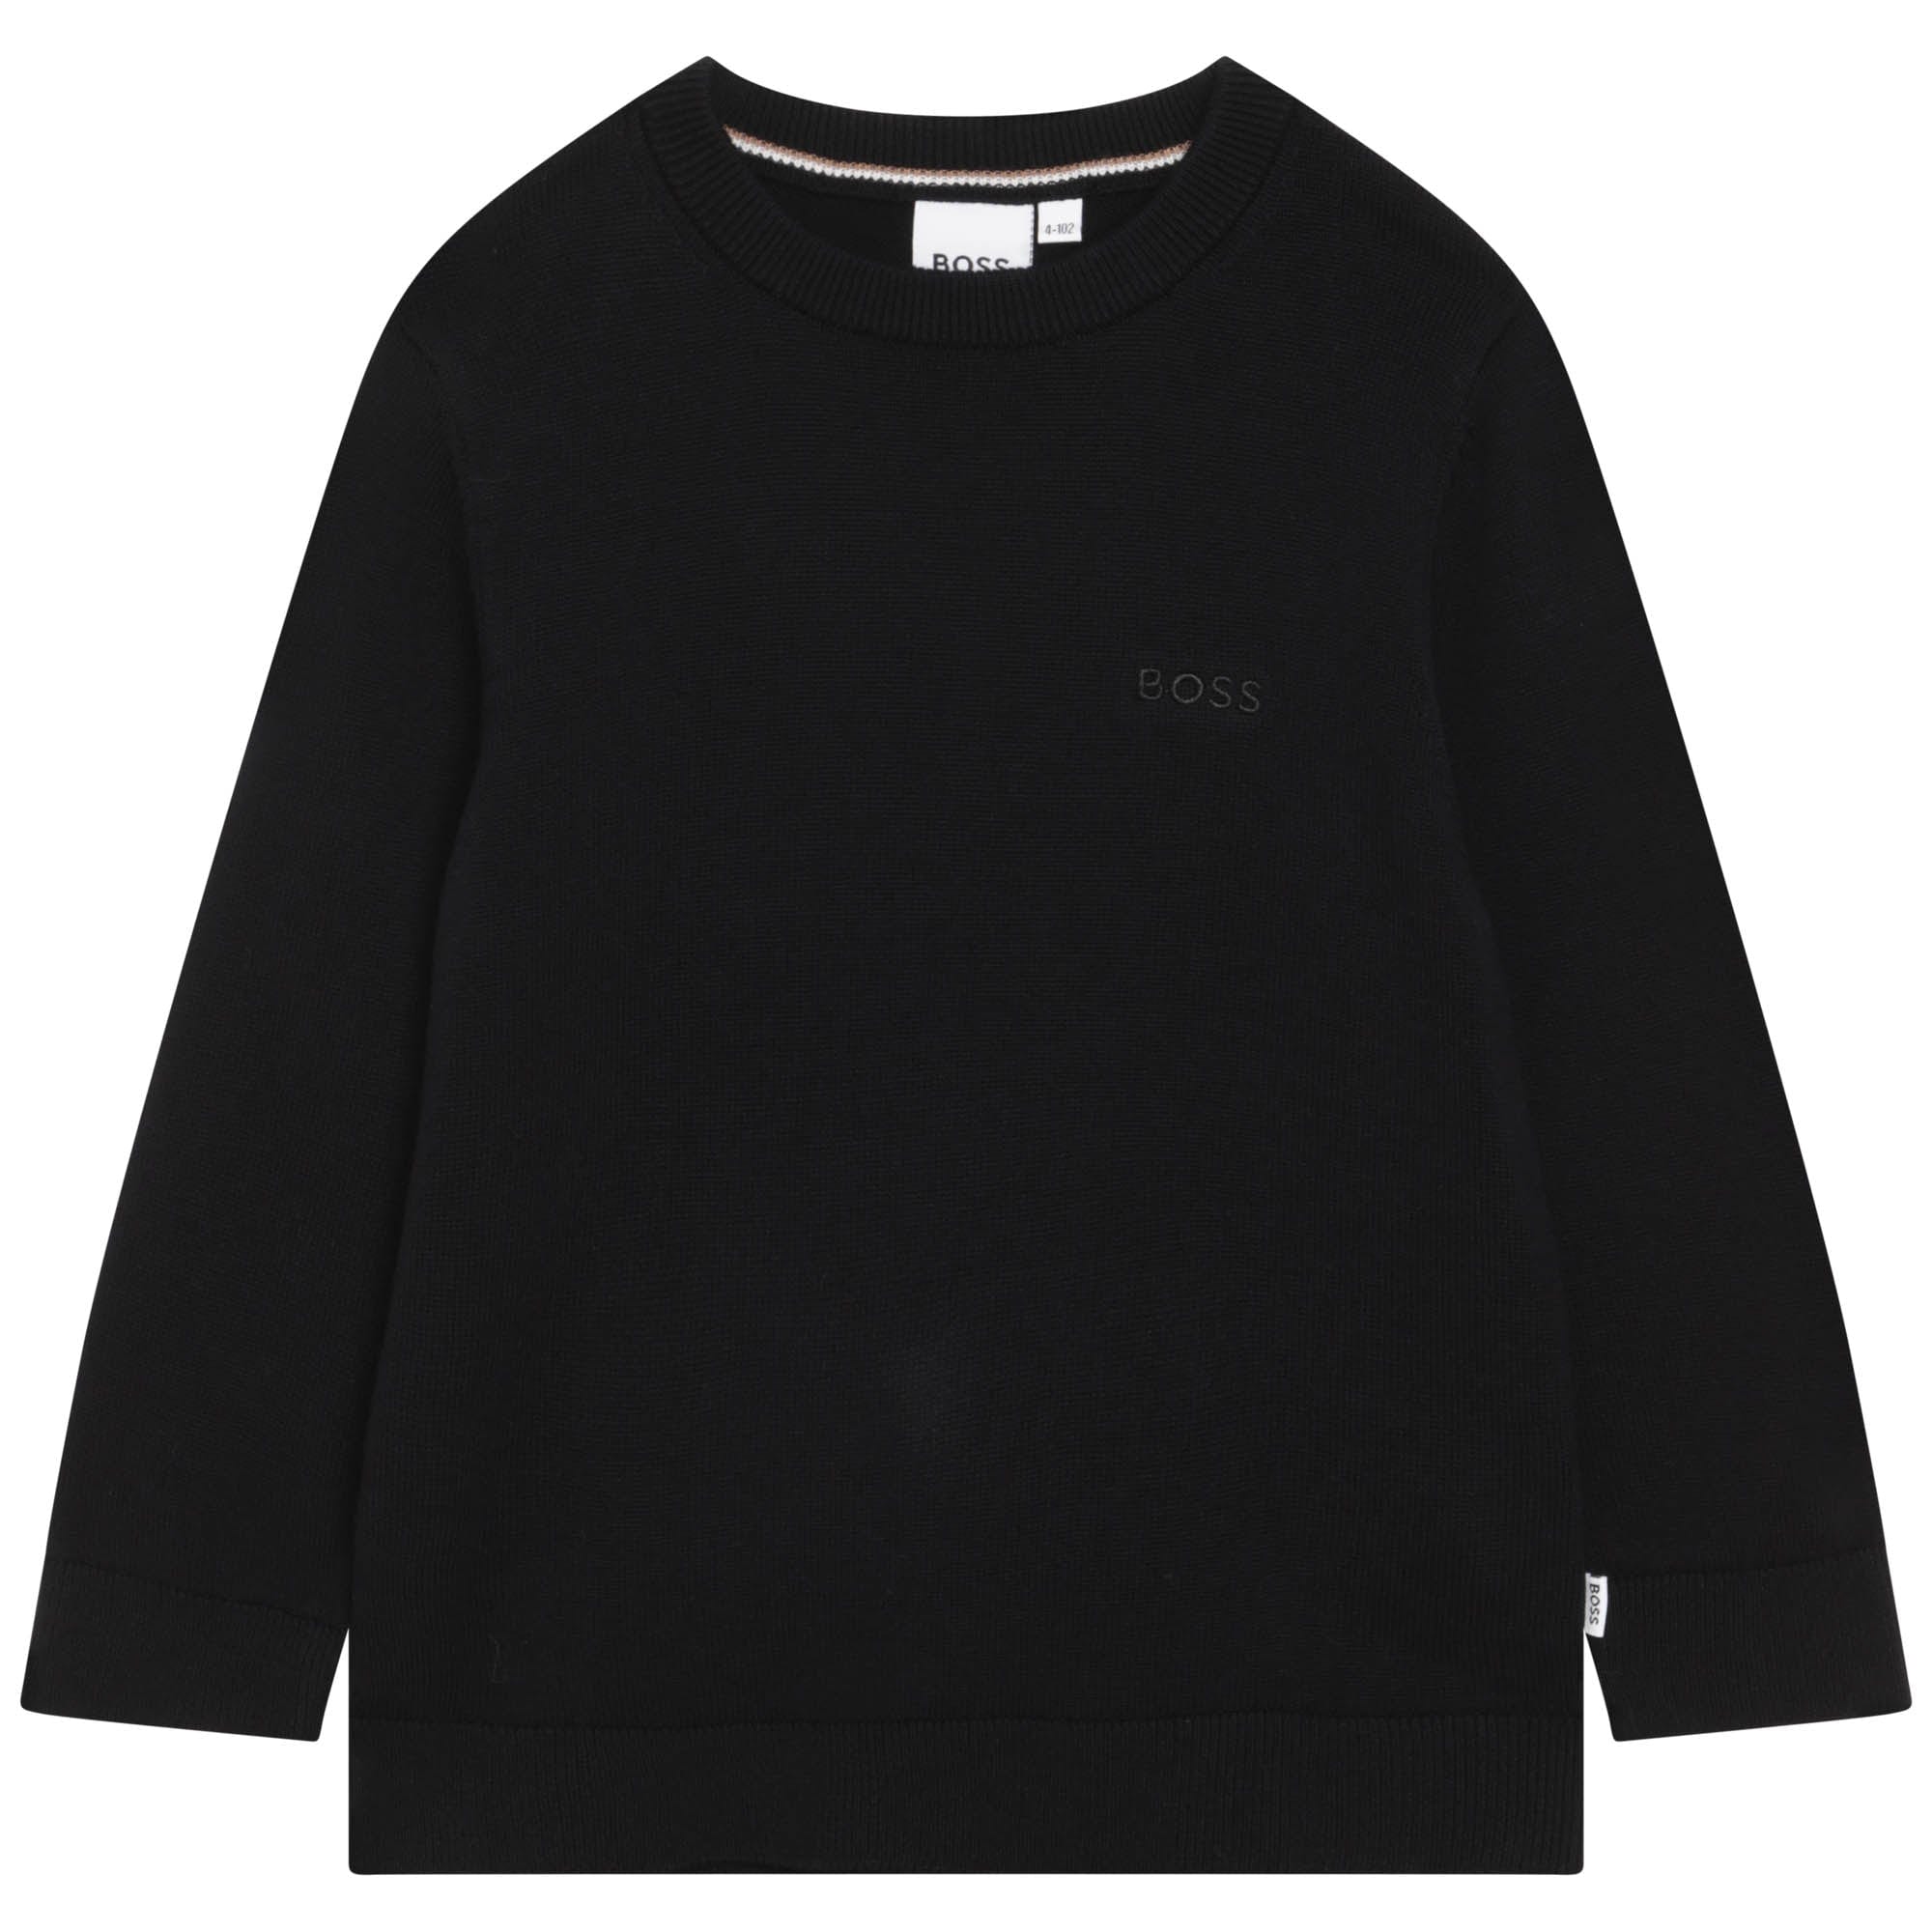 Boss 04A Boys Black Sweater Embroidery